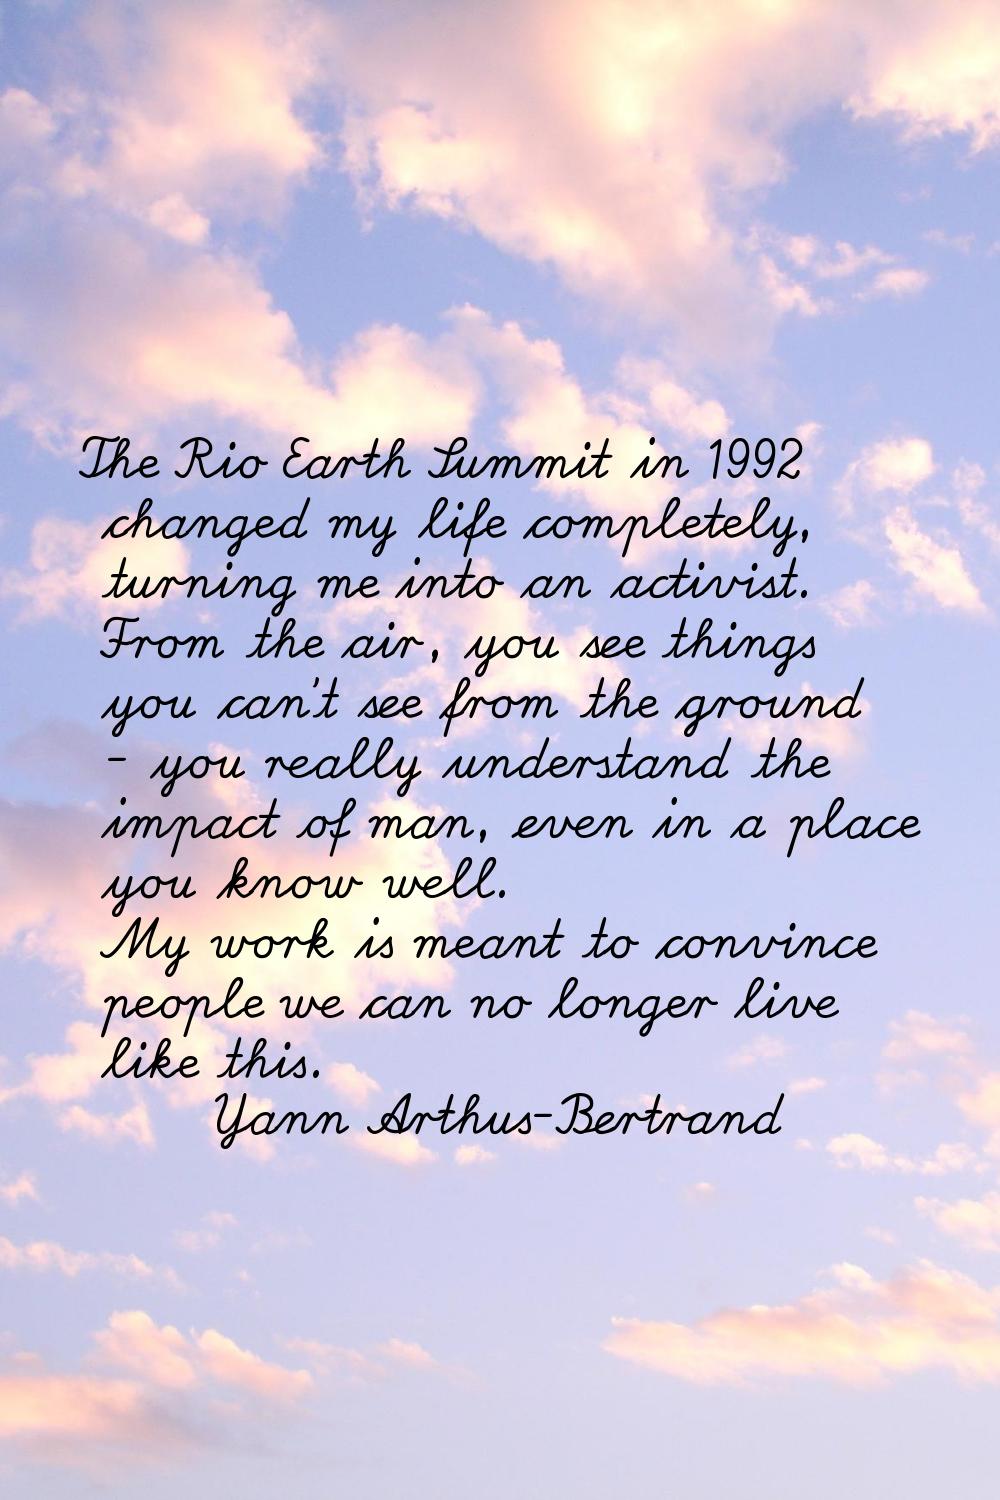 The Rio Earth Summit in 1992 changed my life completely, turning me into an activist. From the air,